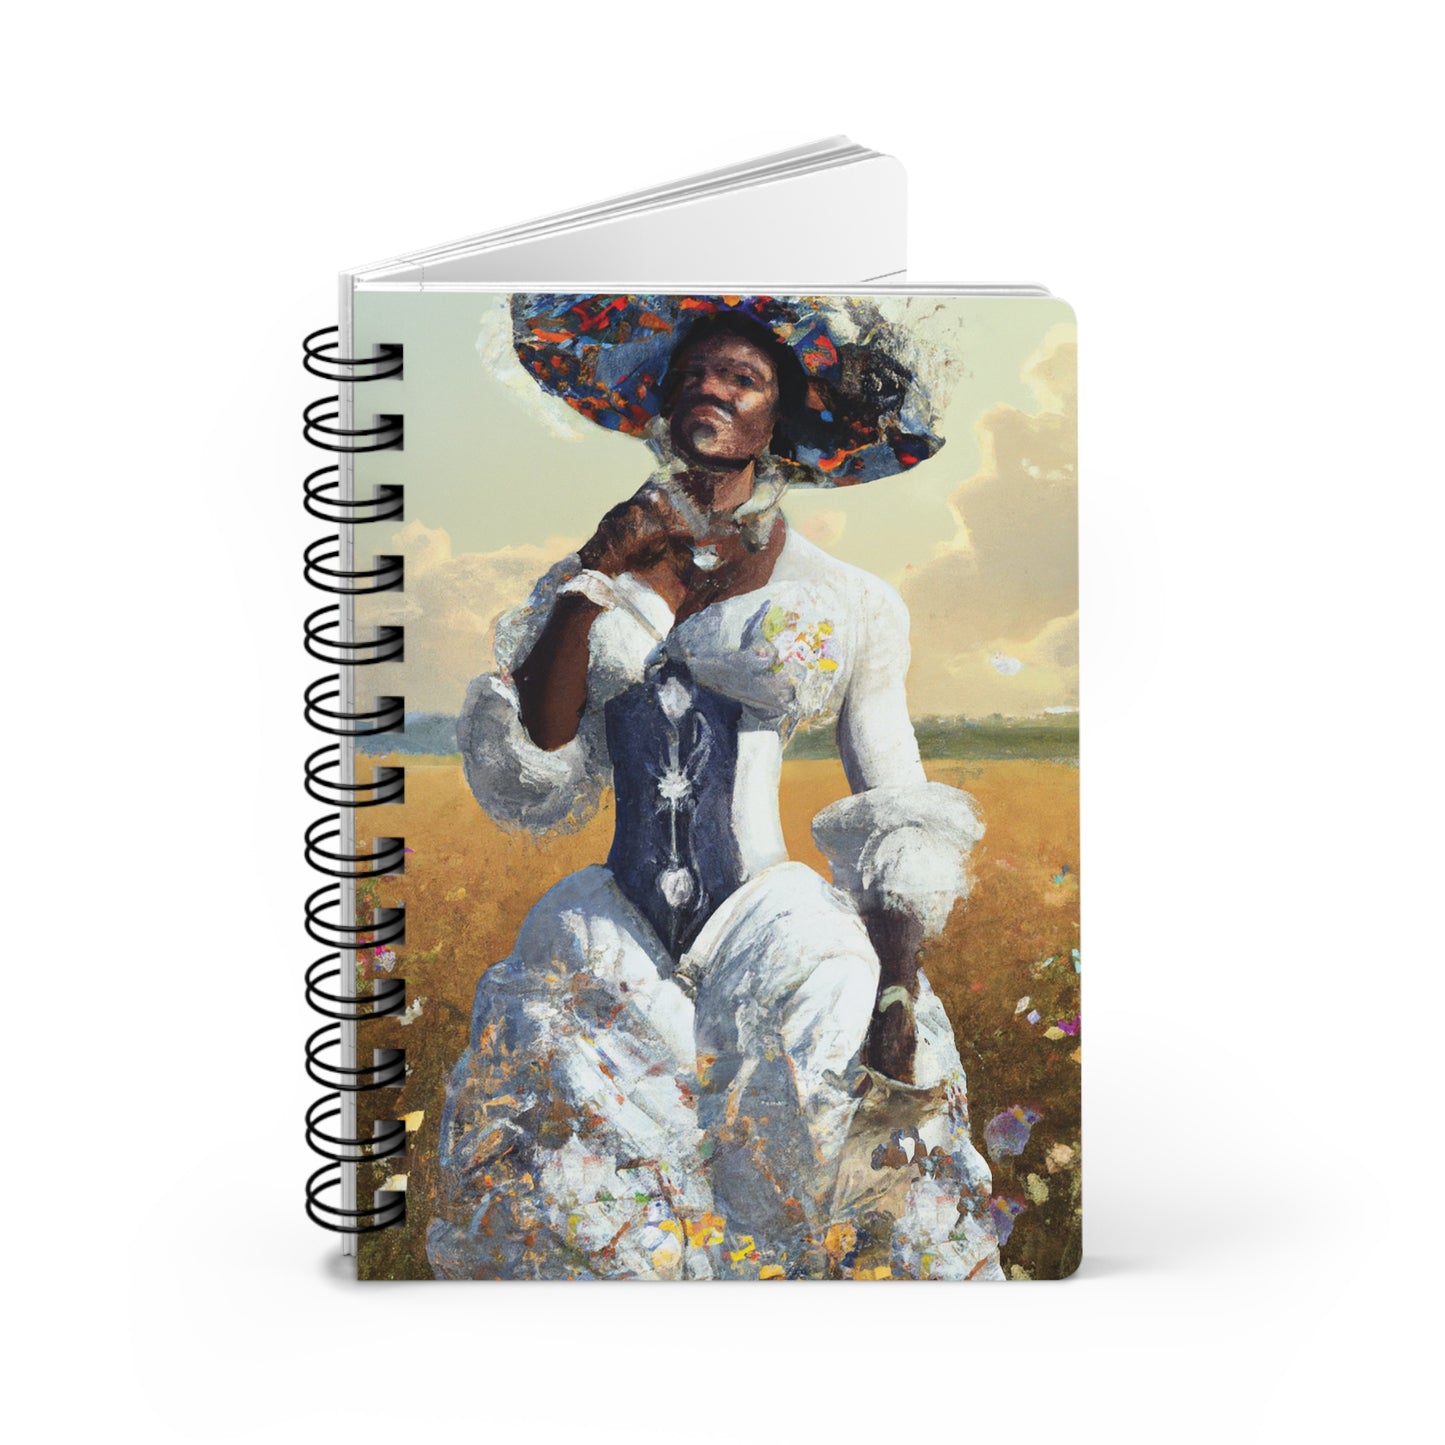 I am Woman Spiral Bound Notebooks and Journals with 2023-2024 Year-at-a-Glance Calendar